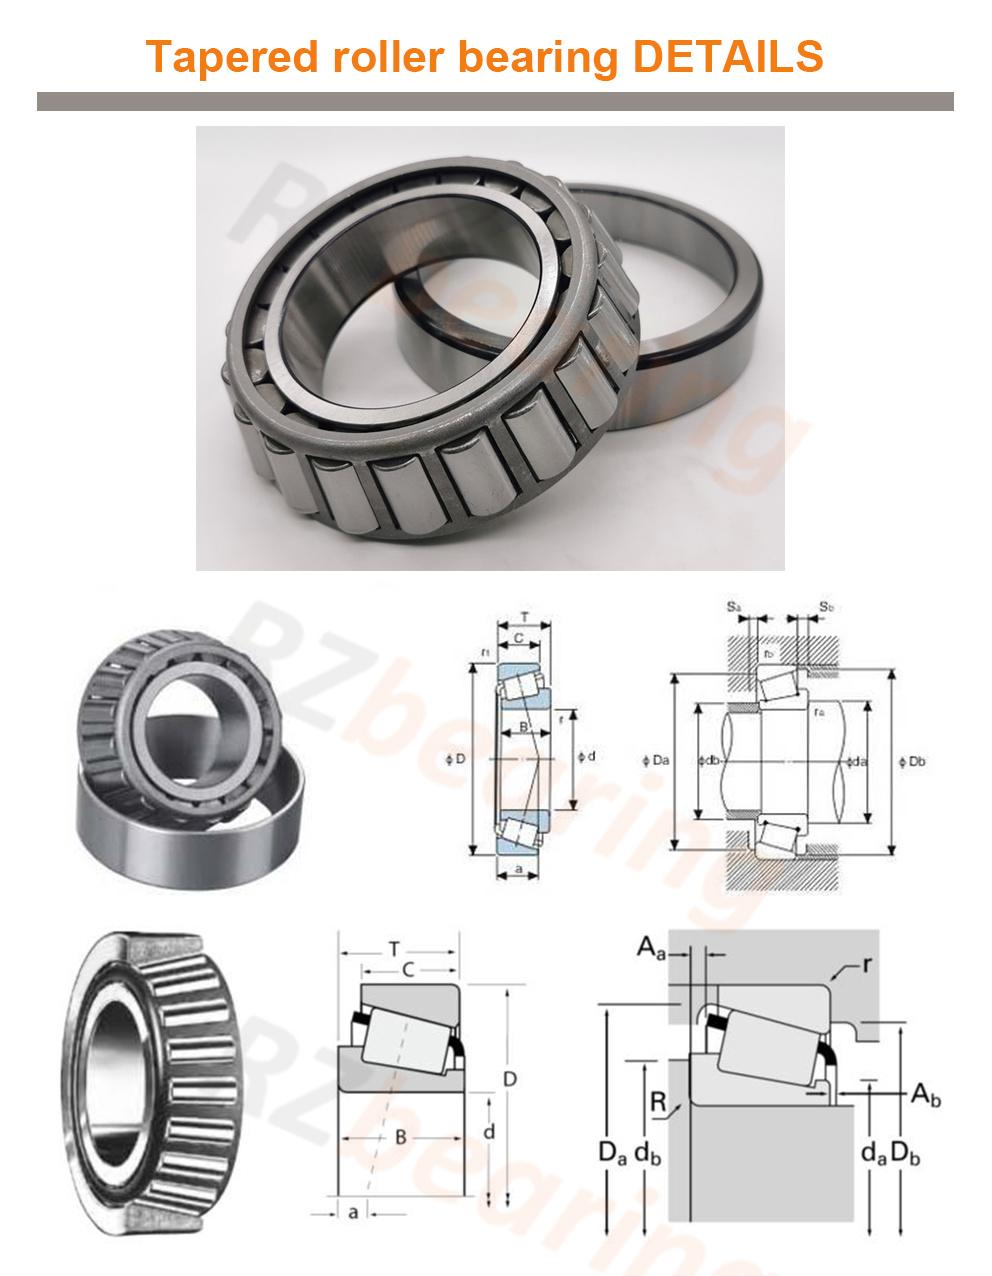 Bearing Spherical Roller Bearing Gearbox Parts Auto Parts Tapered Roller Bearing 32009 with High Quality